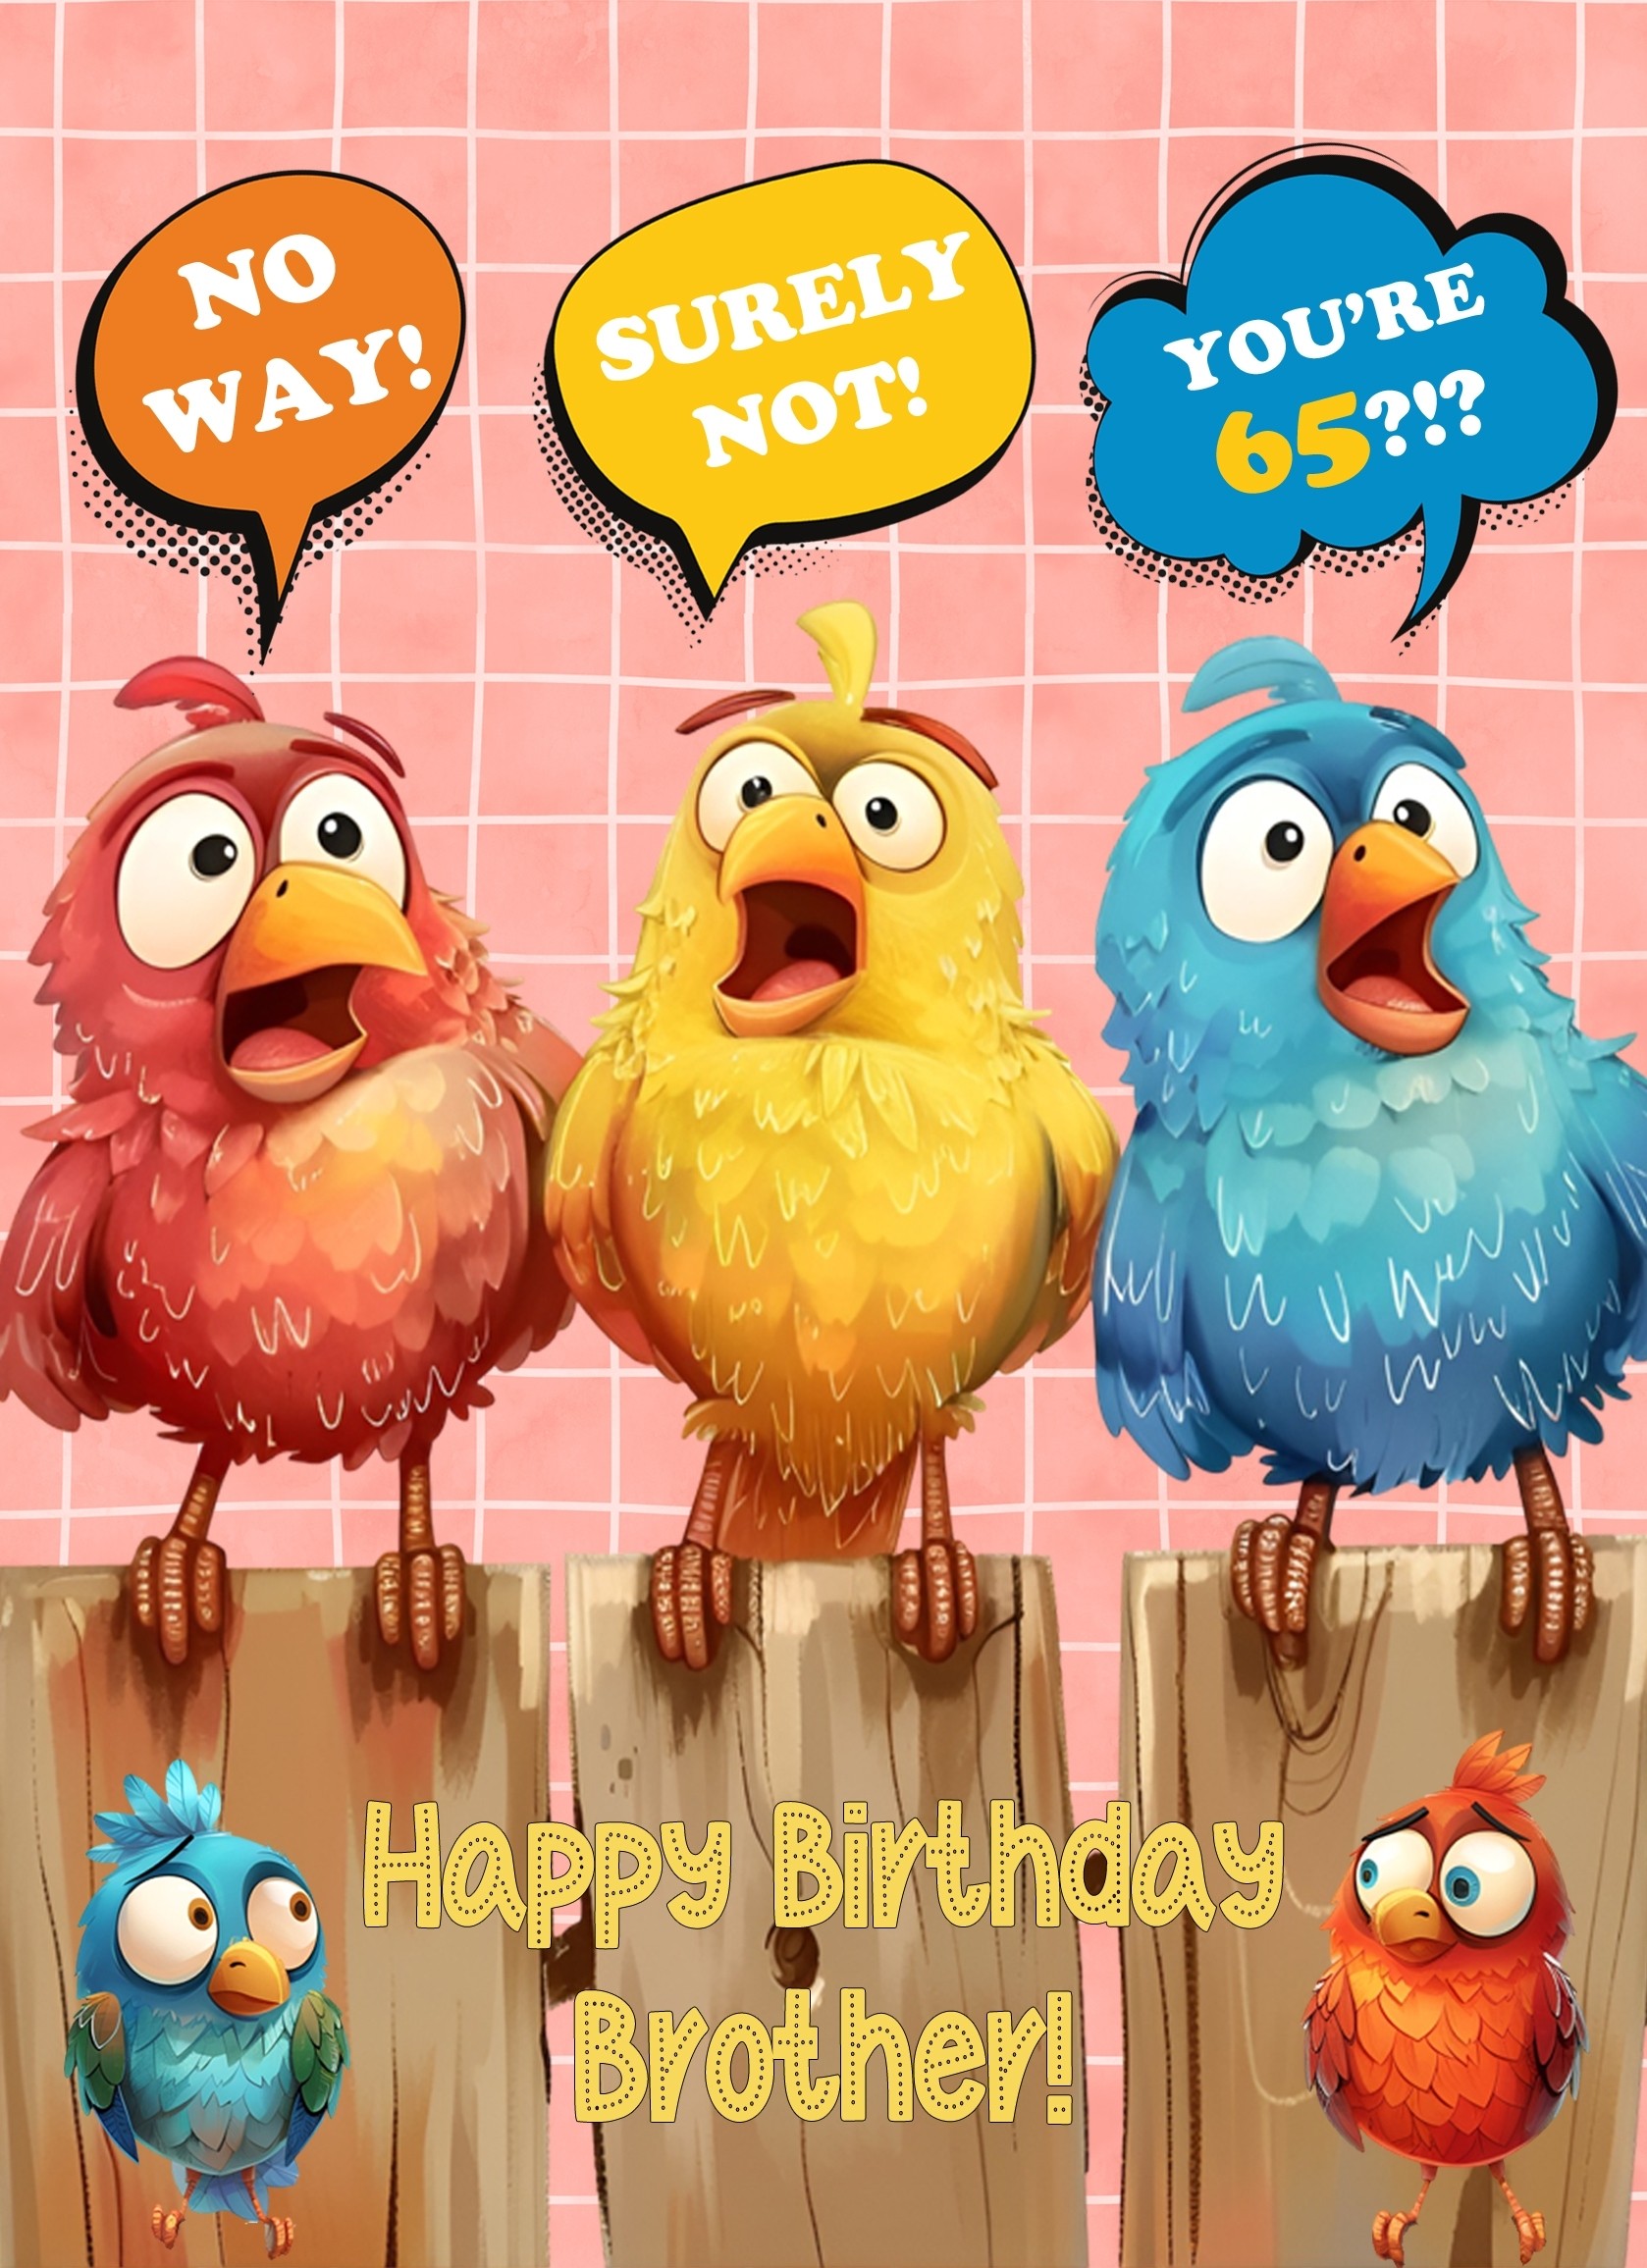 Brother 65th Birthday Card (Funny Birds Surprised)